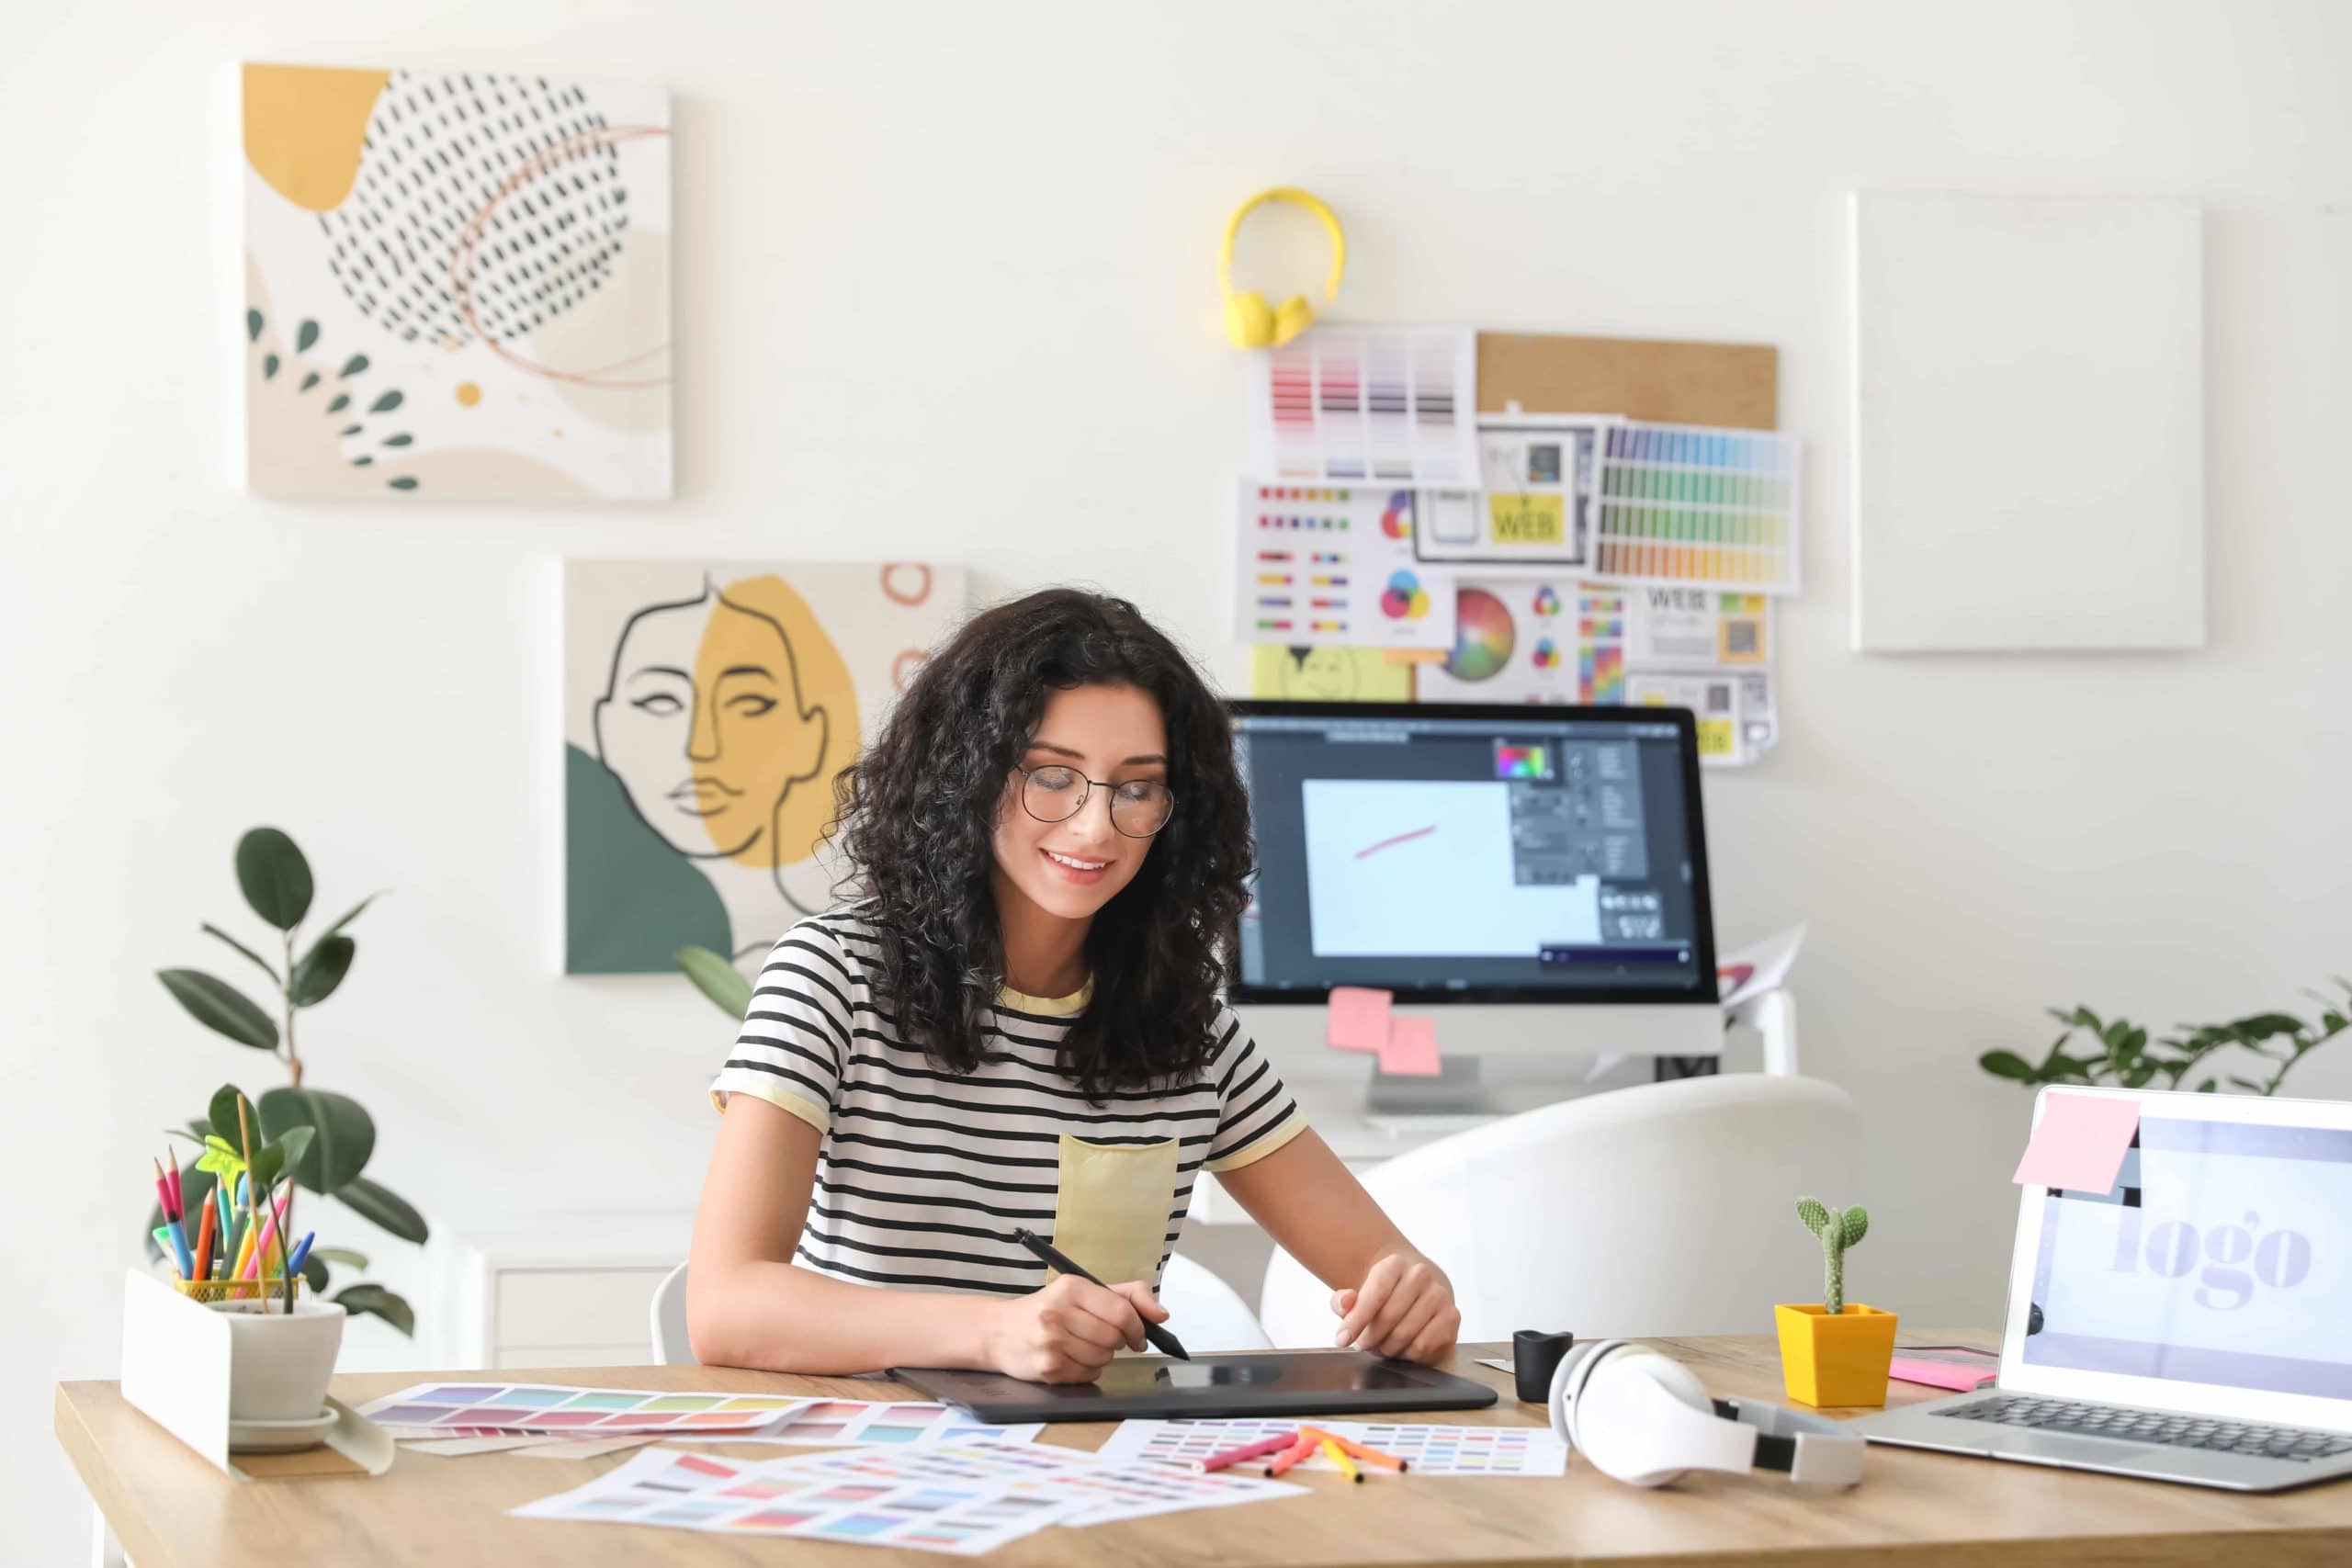 woman at desk using graphic design tools